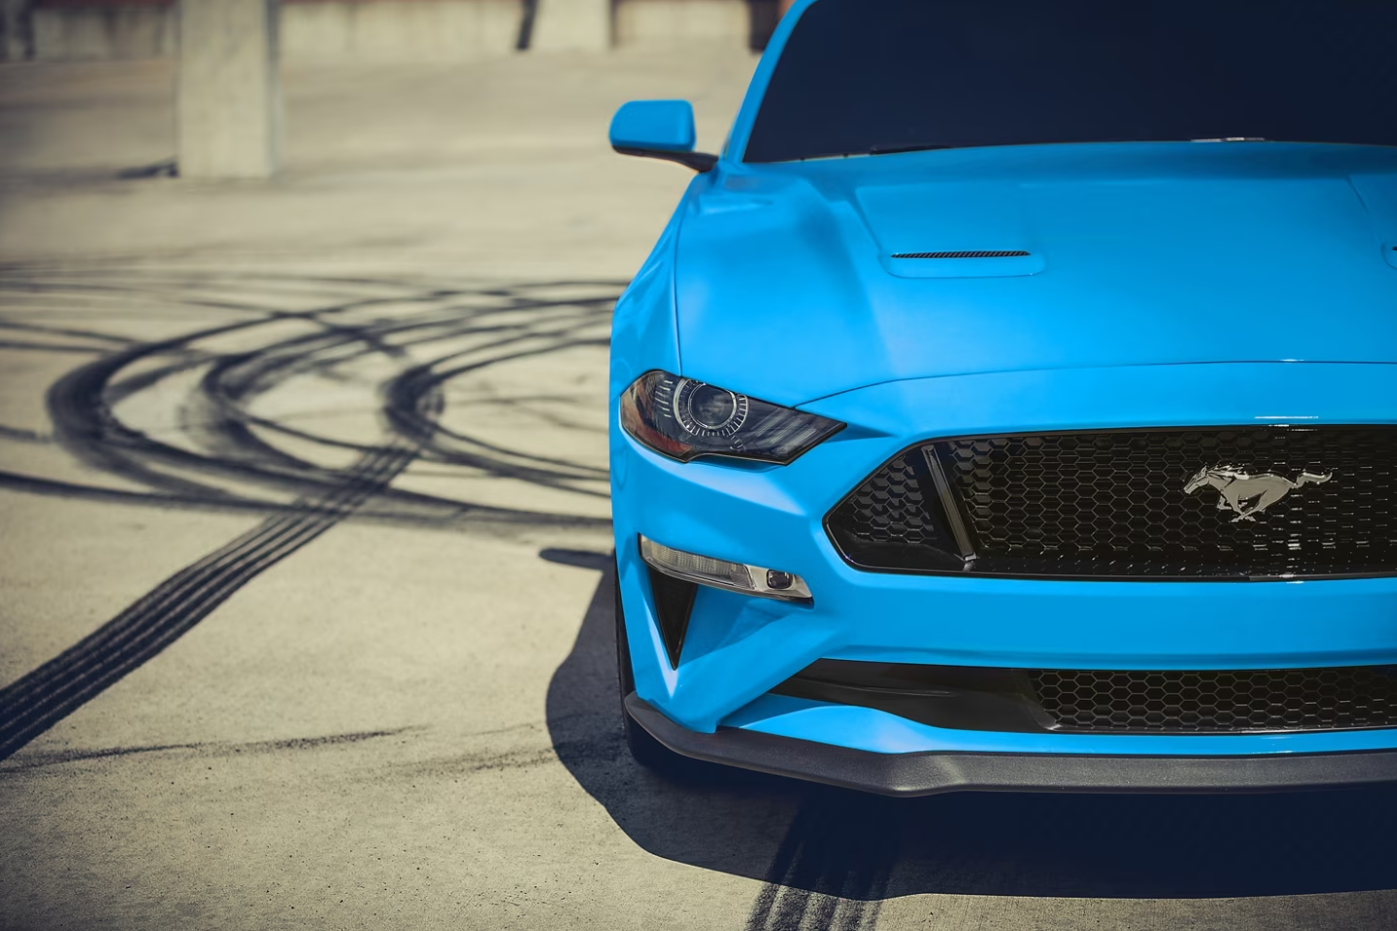 A view of the front of a bright blue 2023 Ford Mustang parked after leaving drag marks on asphalt